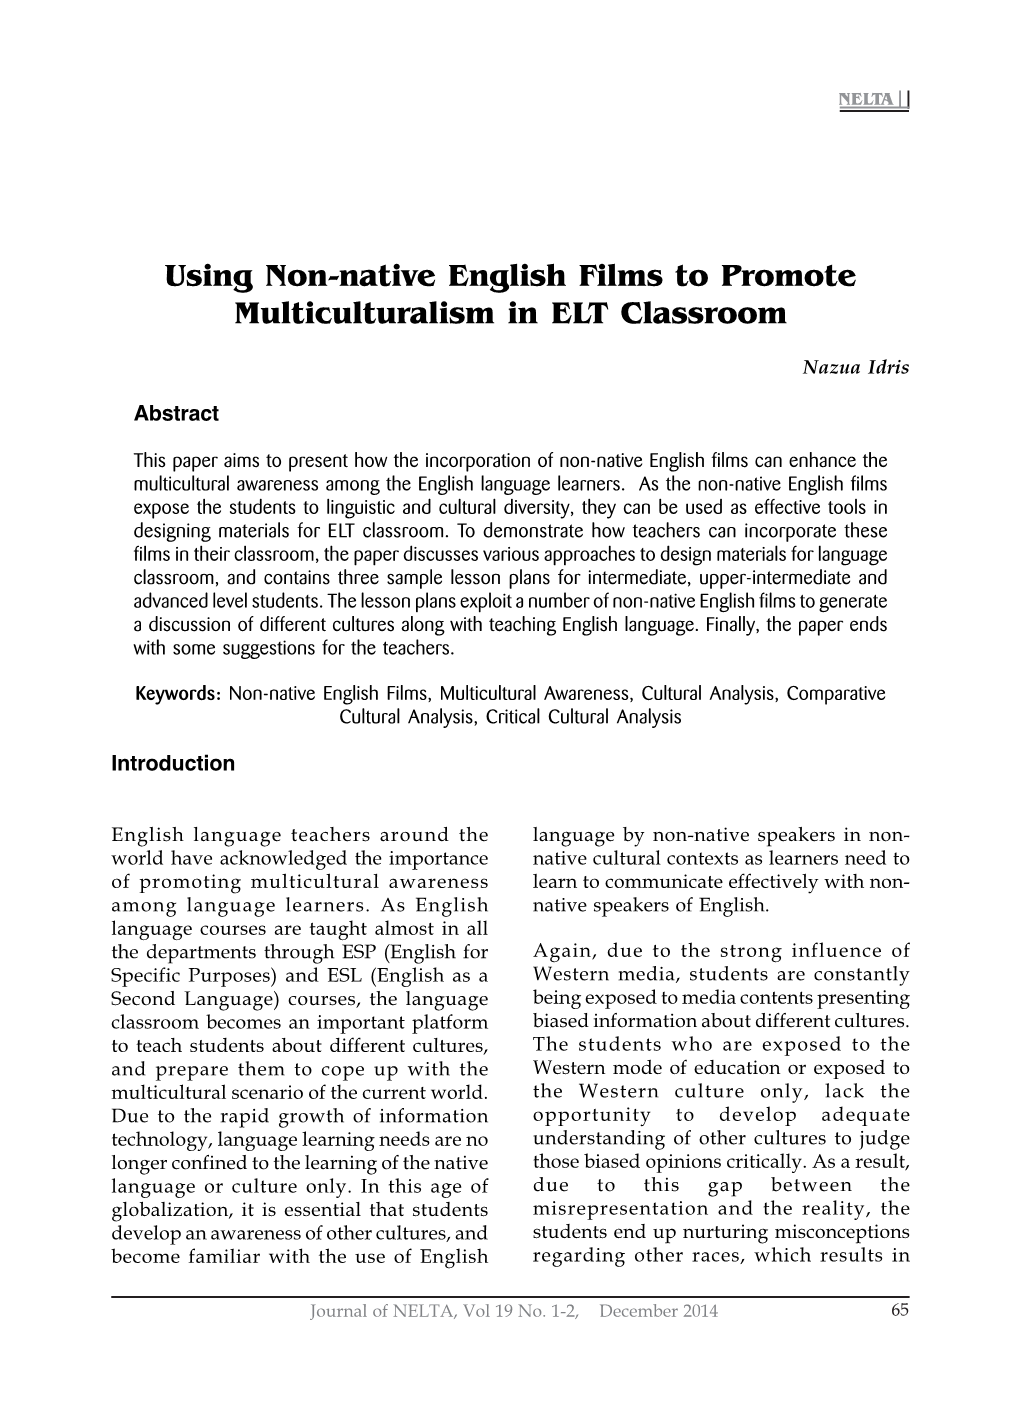 Using Non-Native English Films to Promote Multiculturalism in ELT.Journal of NELTA